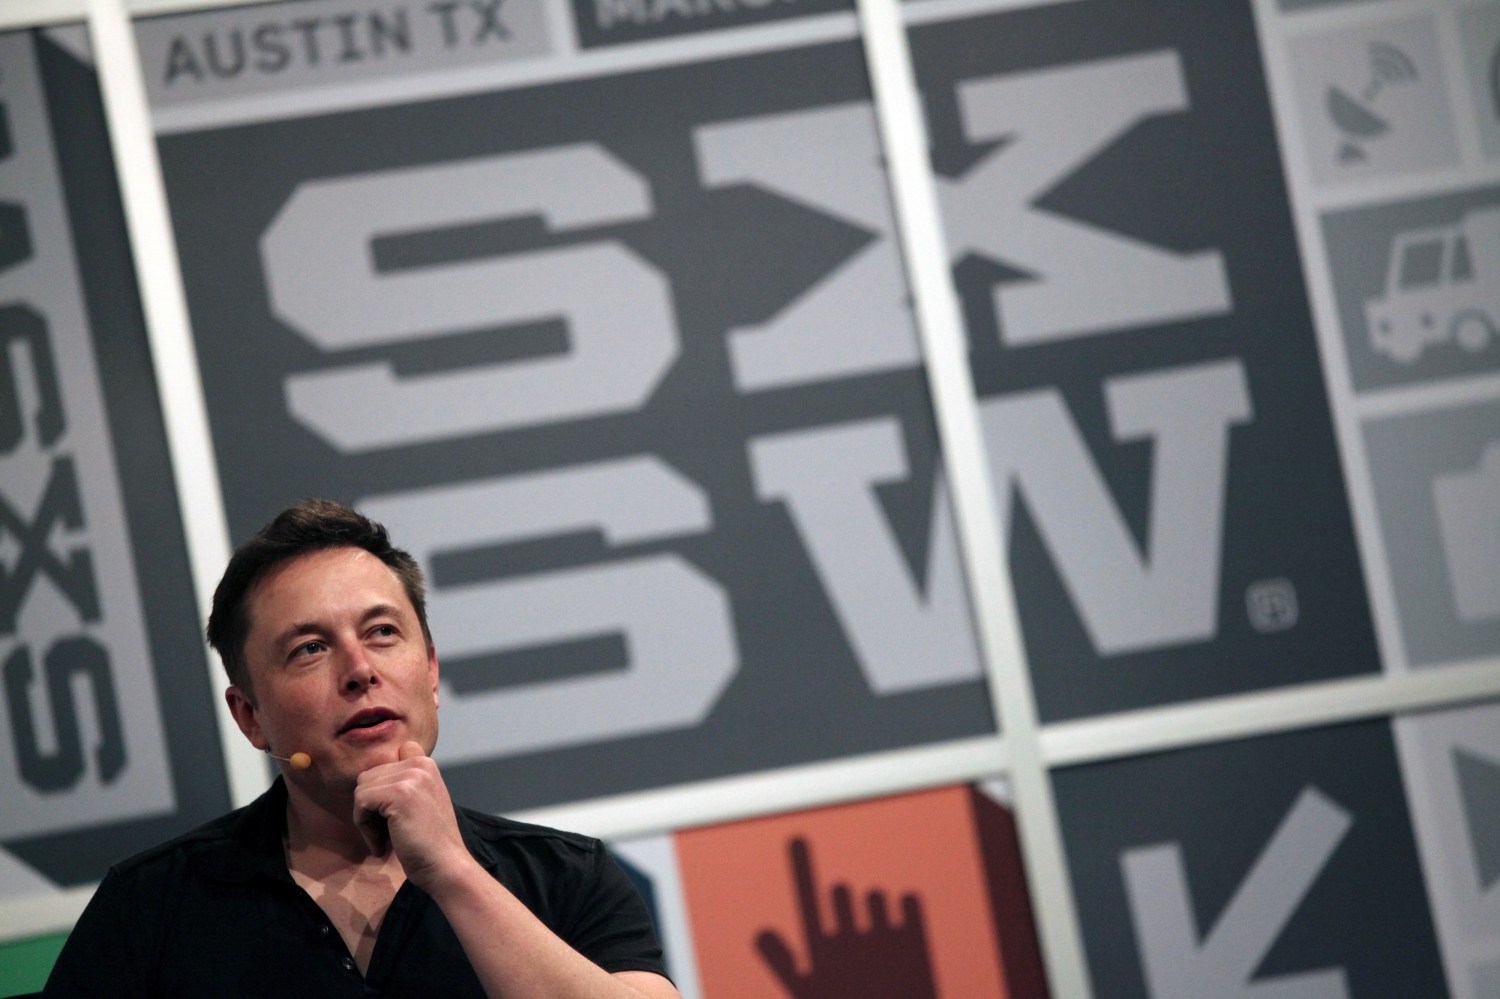 FILE PHOTO: Elon Musk, the chief executive of Tesla Motor, speaks at the South by Southwest Interactive festival in Austin, Texas, March 9, 2013. REUTERS/Gerry Shih/File Photo